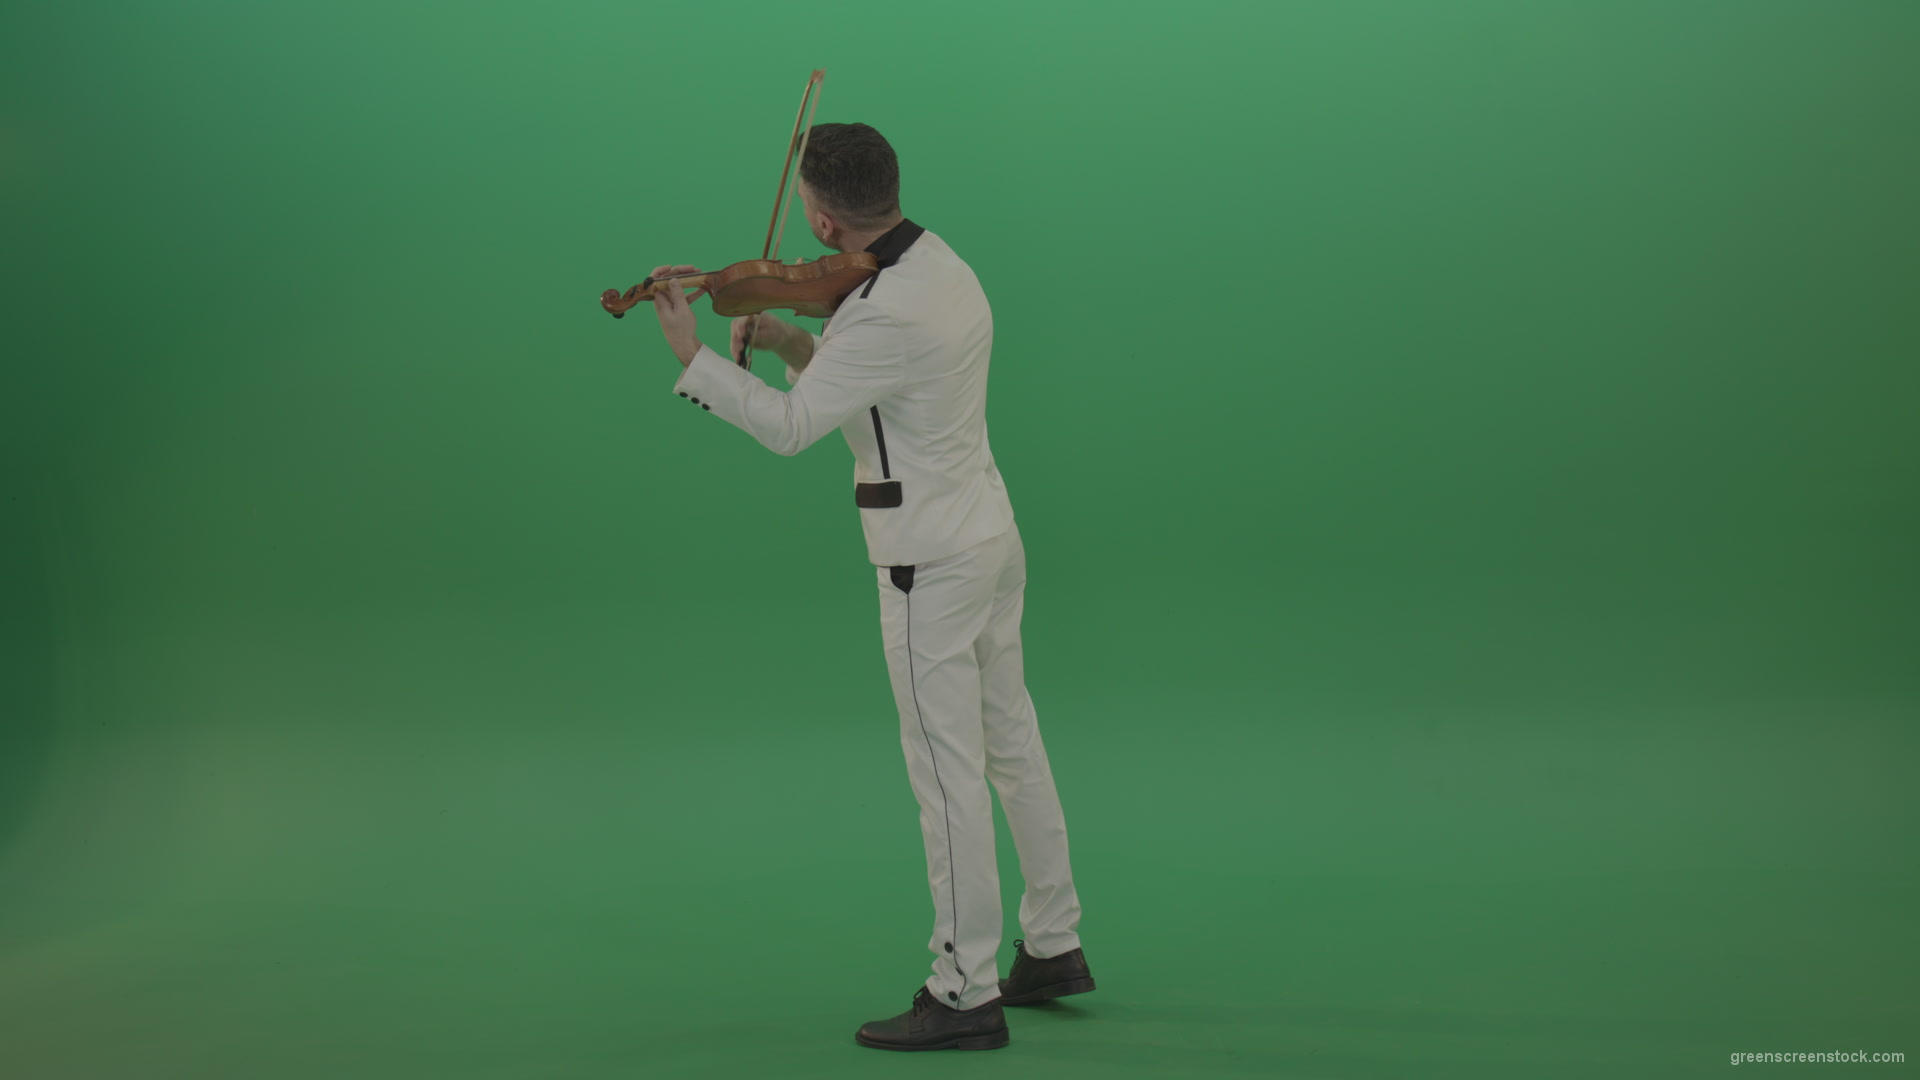 Full-size-Classic-orchestra-man-in-white-wear-play-violin-strings-music-instrument-isolated-on-green-screen-back-side-view_005 Green Screen Stock